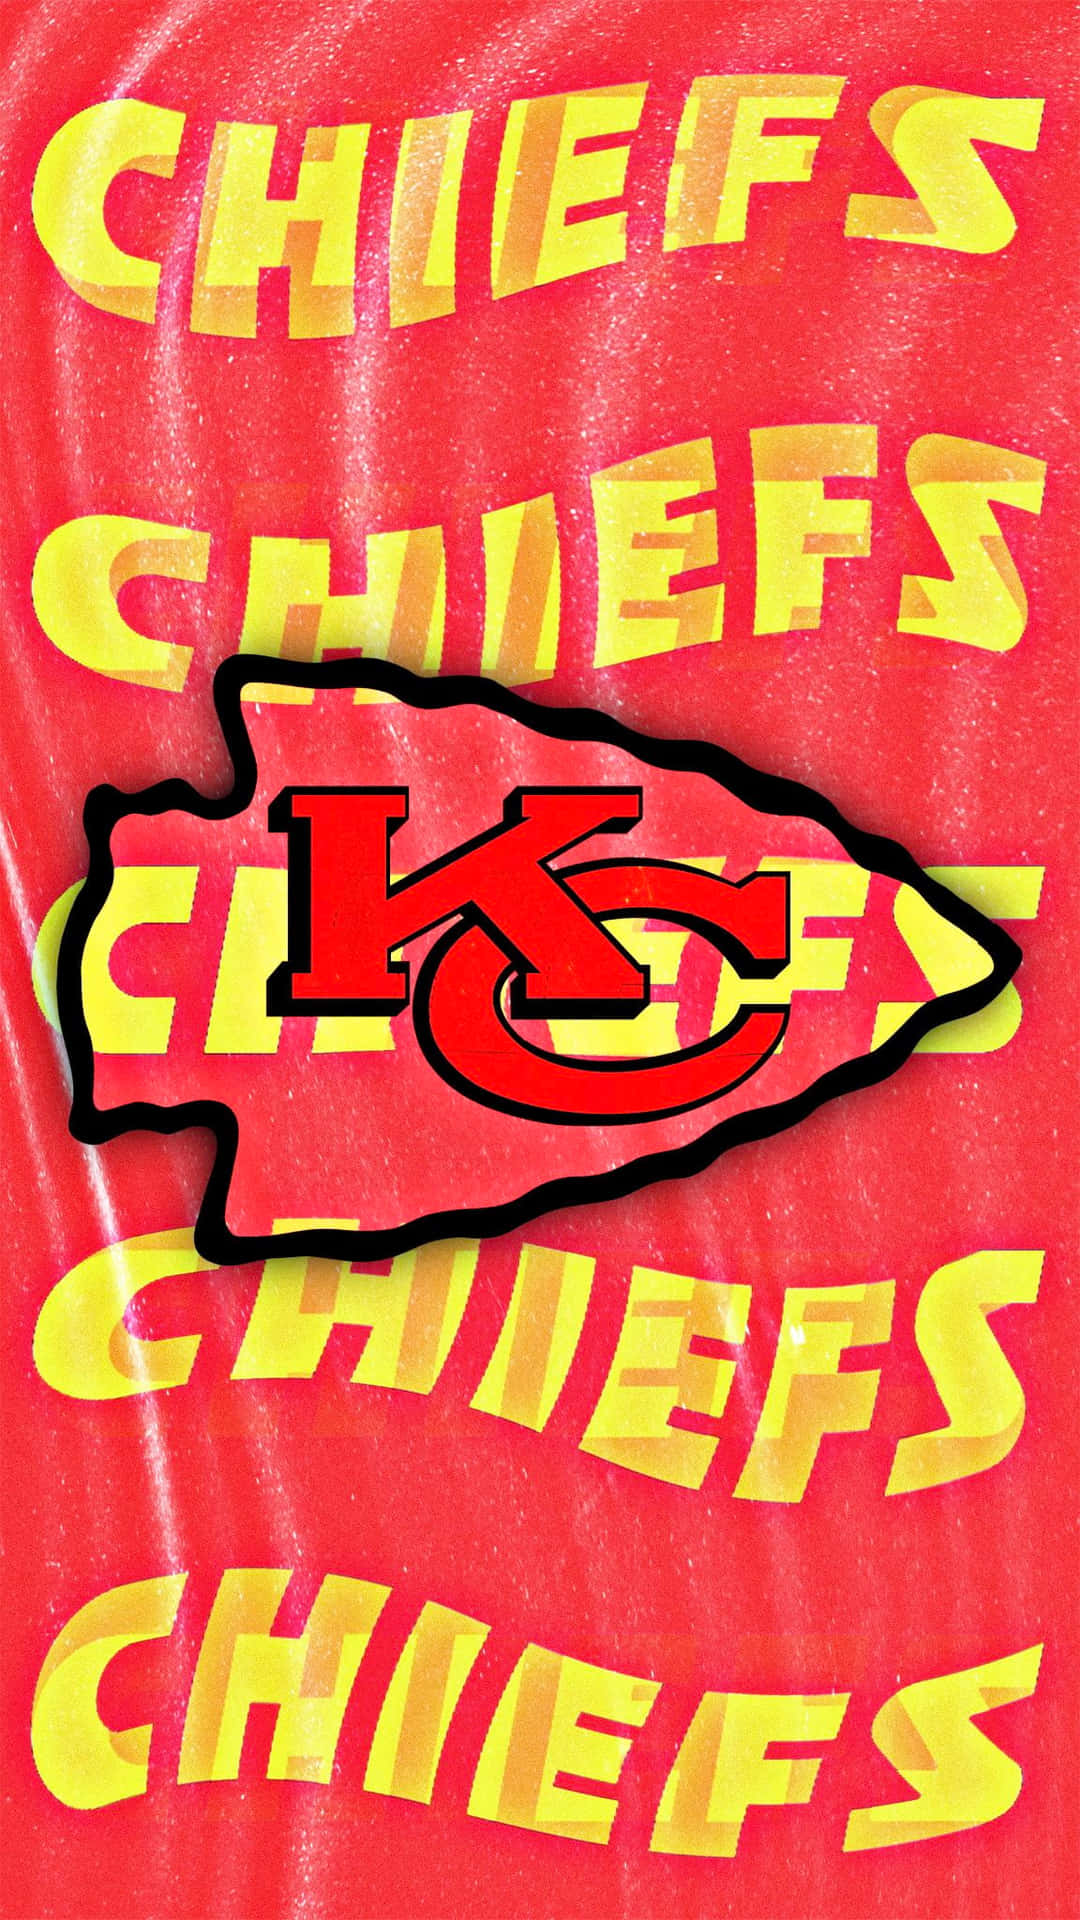 Show your pride for the Kansas City Chiefs with this sleek iPhone wallpaper. Wallpaper